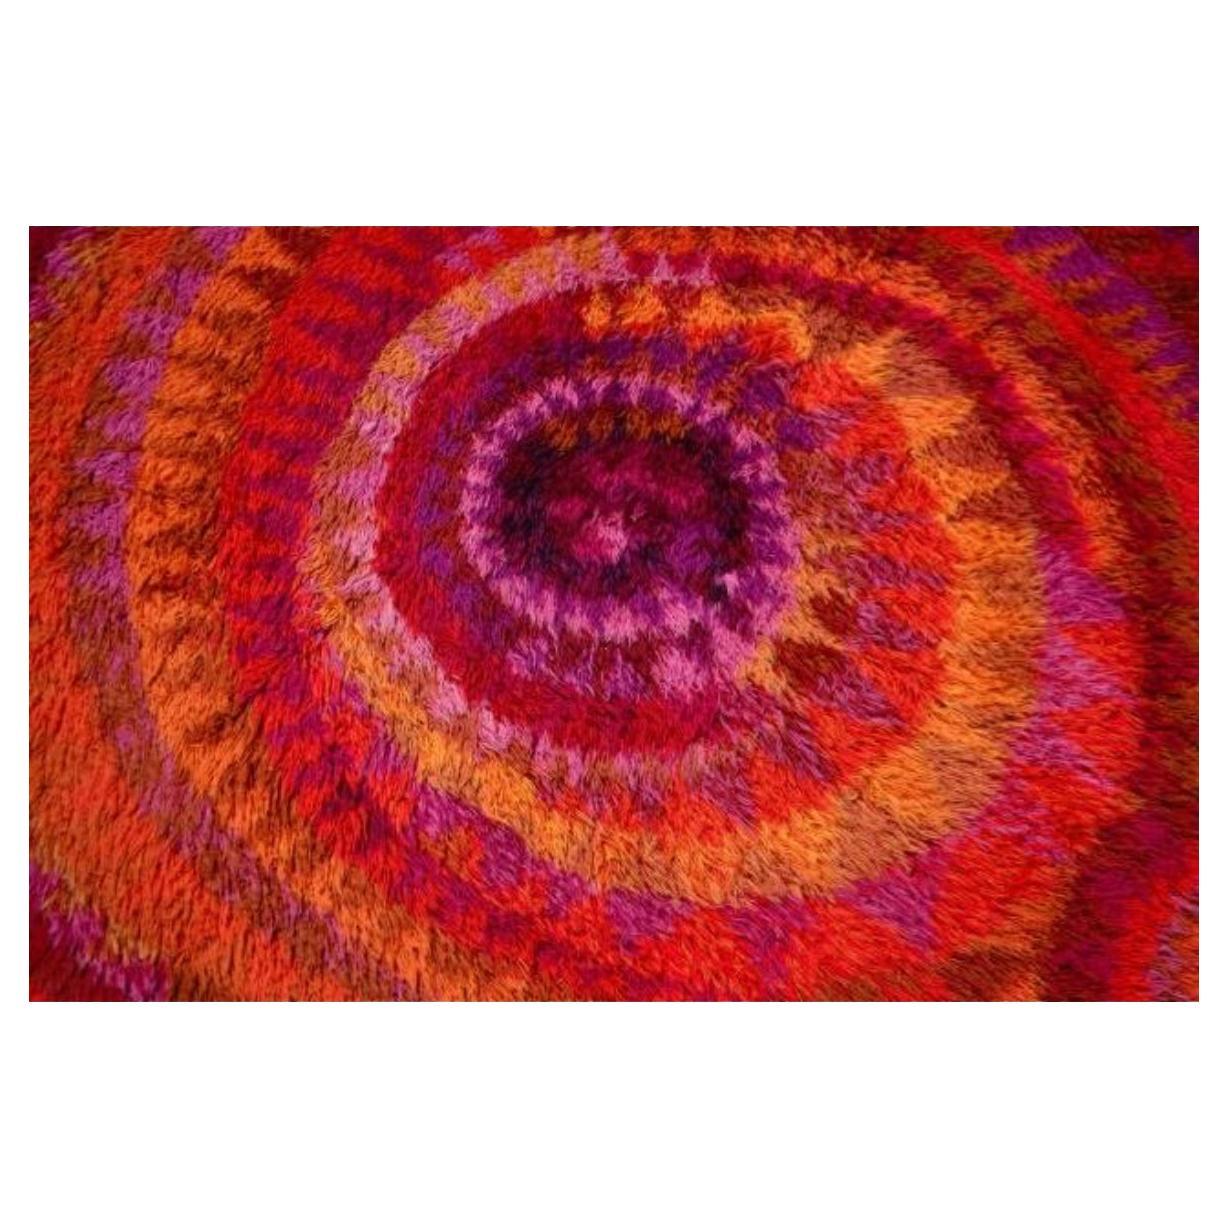 Trippy Mid century vintage Rya Rug Vibrant very colorful Spirals Sweden. Very fun Spiral Patterns with other circular patterns. Many Vibrant Colors in good vintage condition. Nice soft Wool high quality woven rug. Made in Sweden Located in Brooklyn